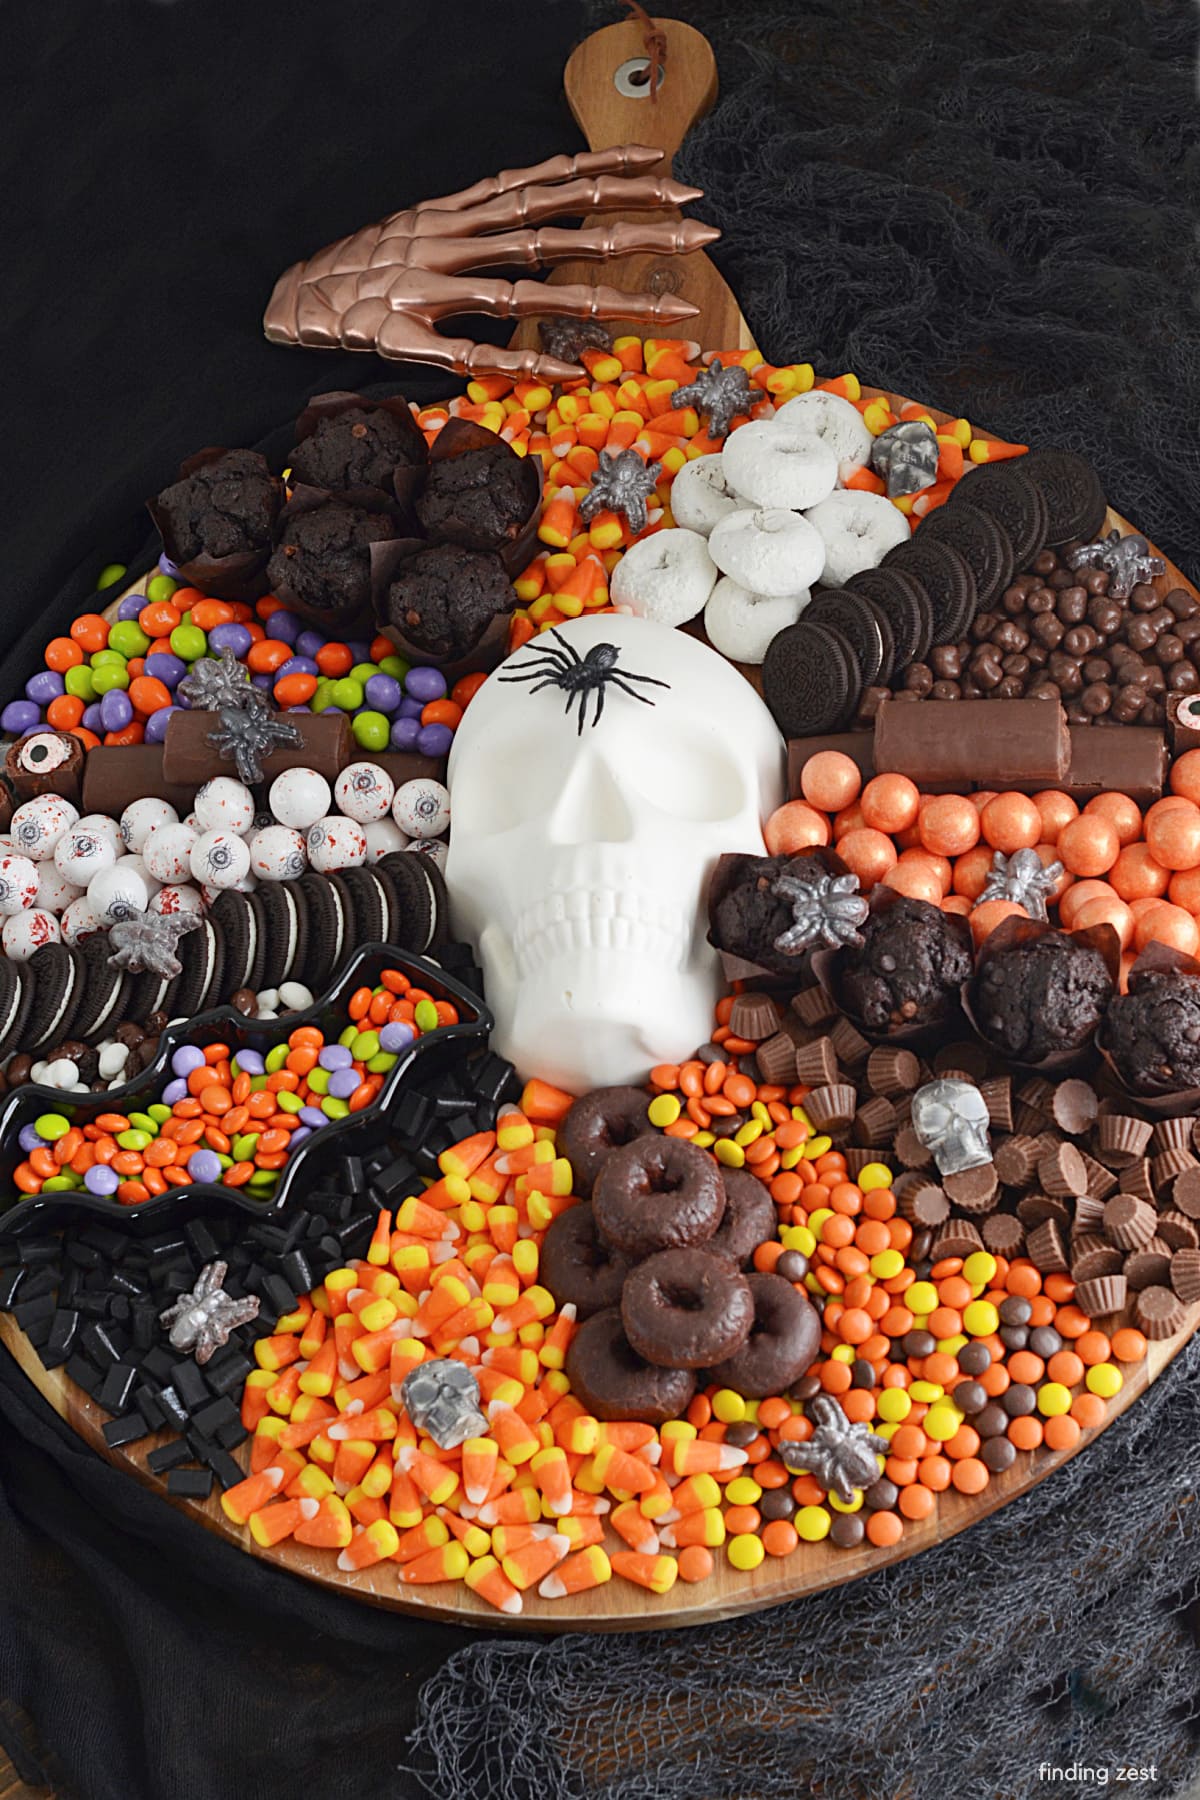 This Halloween Charcuterie Board is easy party treat and a great addition to your next Halloween bash! A chocolate skull, candy and dessert board that's sure to sweeten up the night. Easy step-by-step instructions are included to make the large 2D chocolate skull!